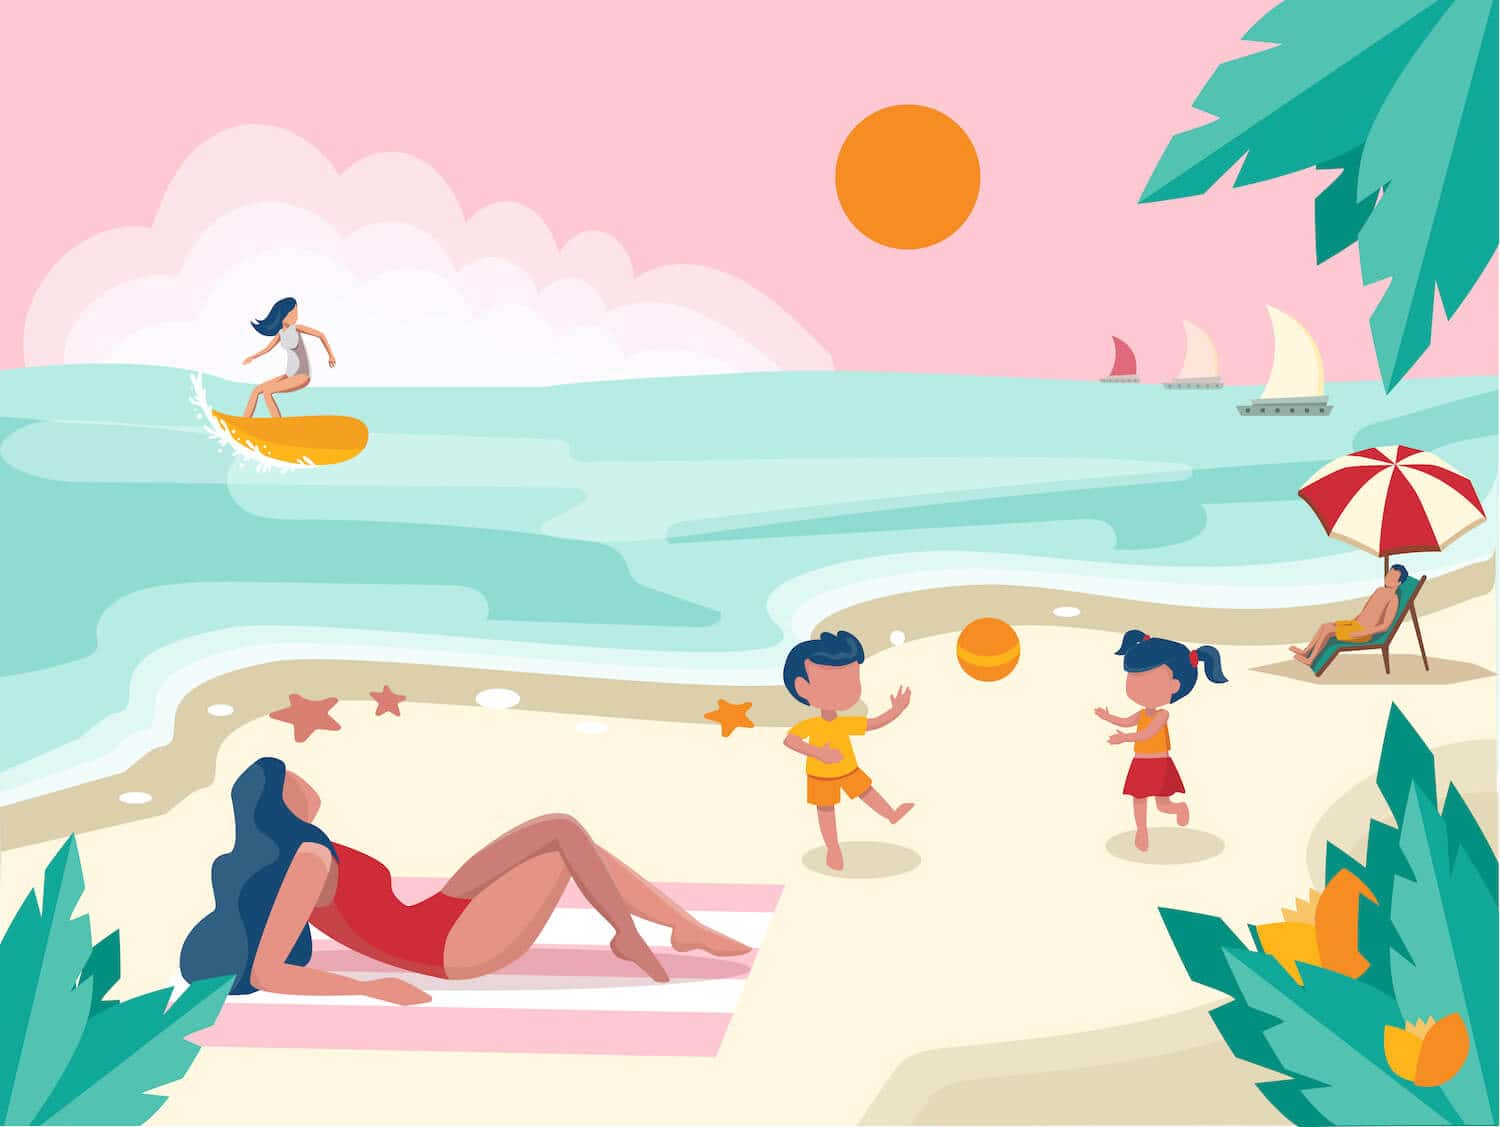 An illustration of a scene of a family playing and relaxing on the beach